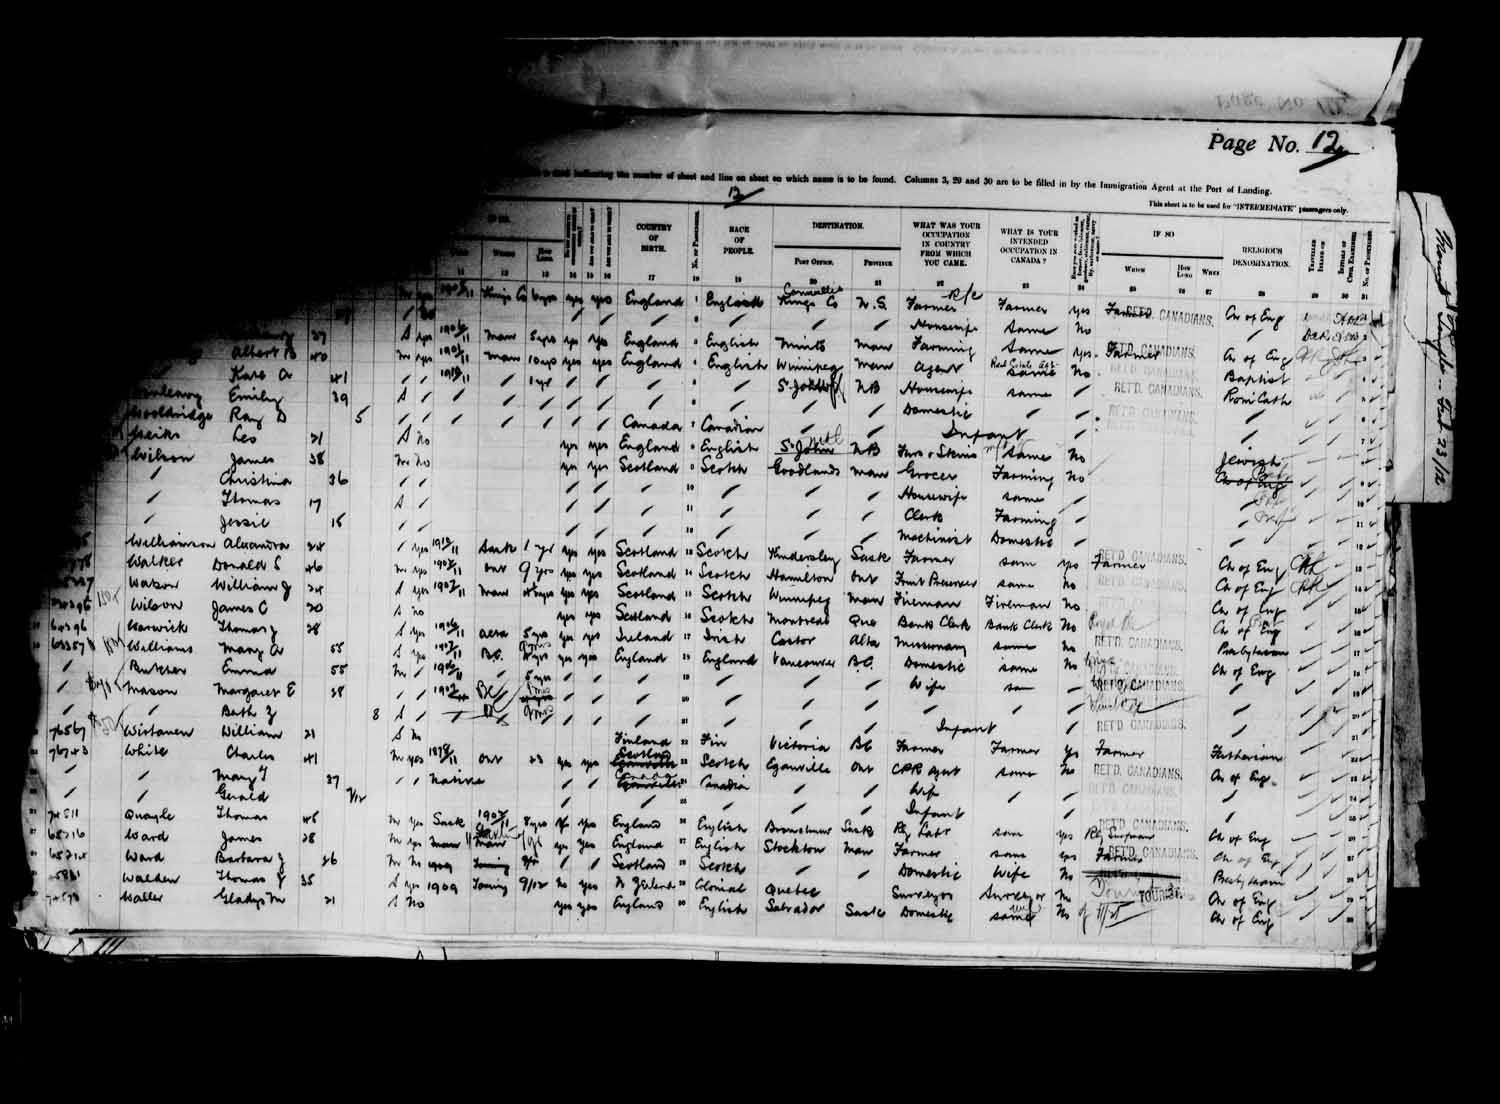 Digitized page of Passenger Lists for Image No.: e003627185